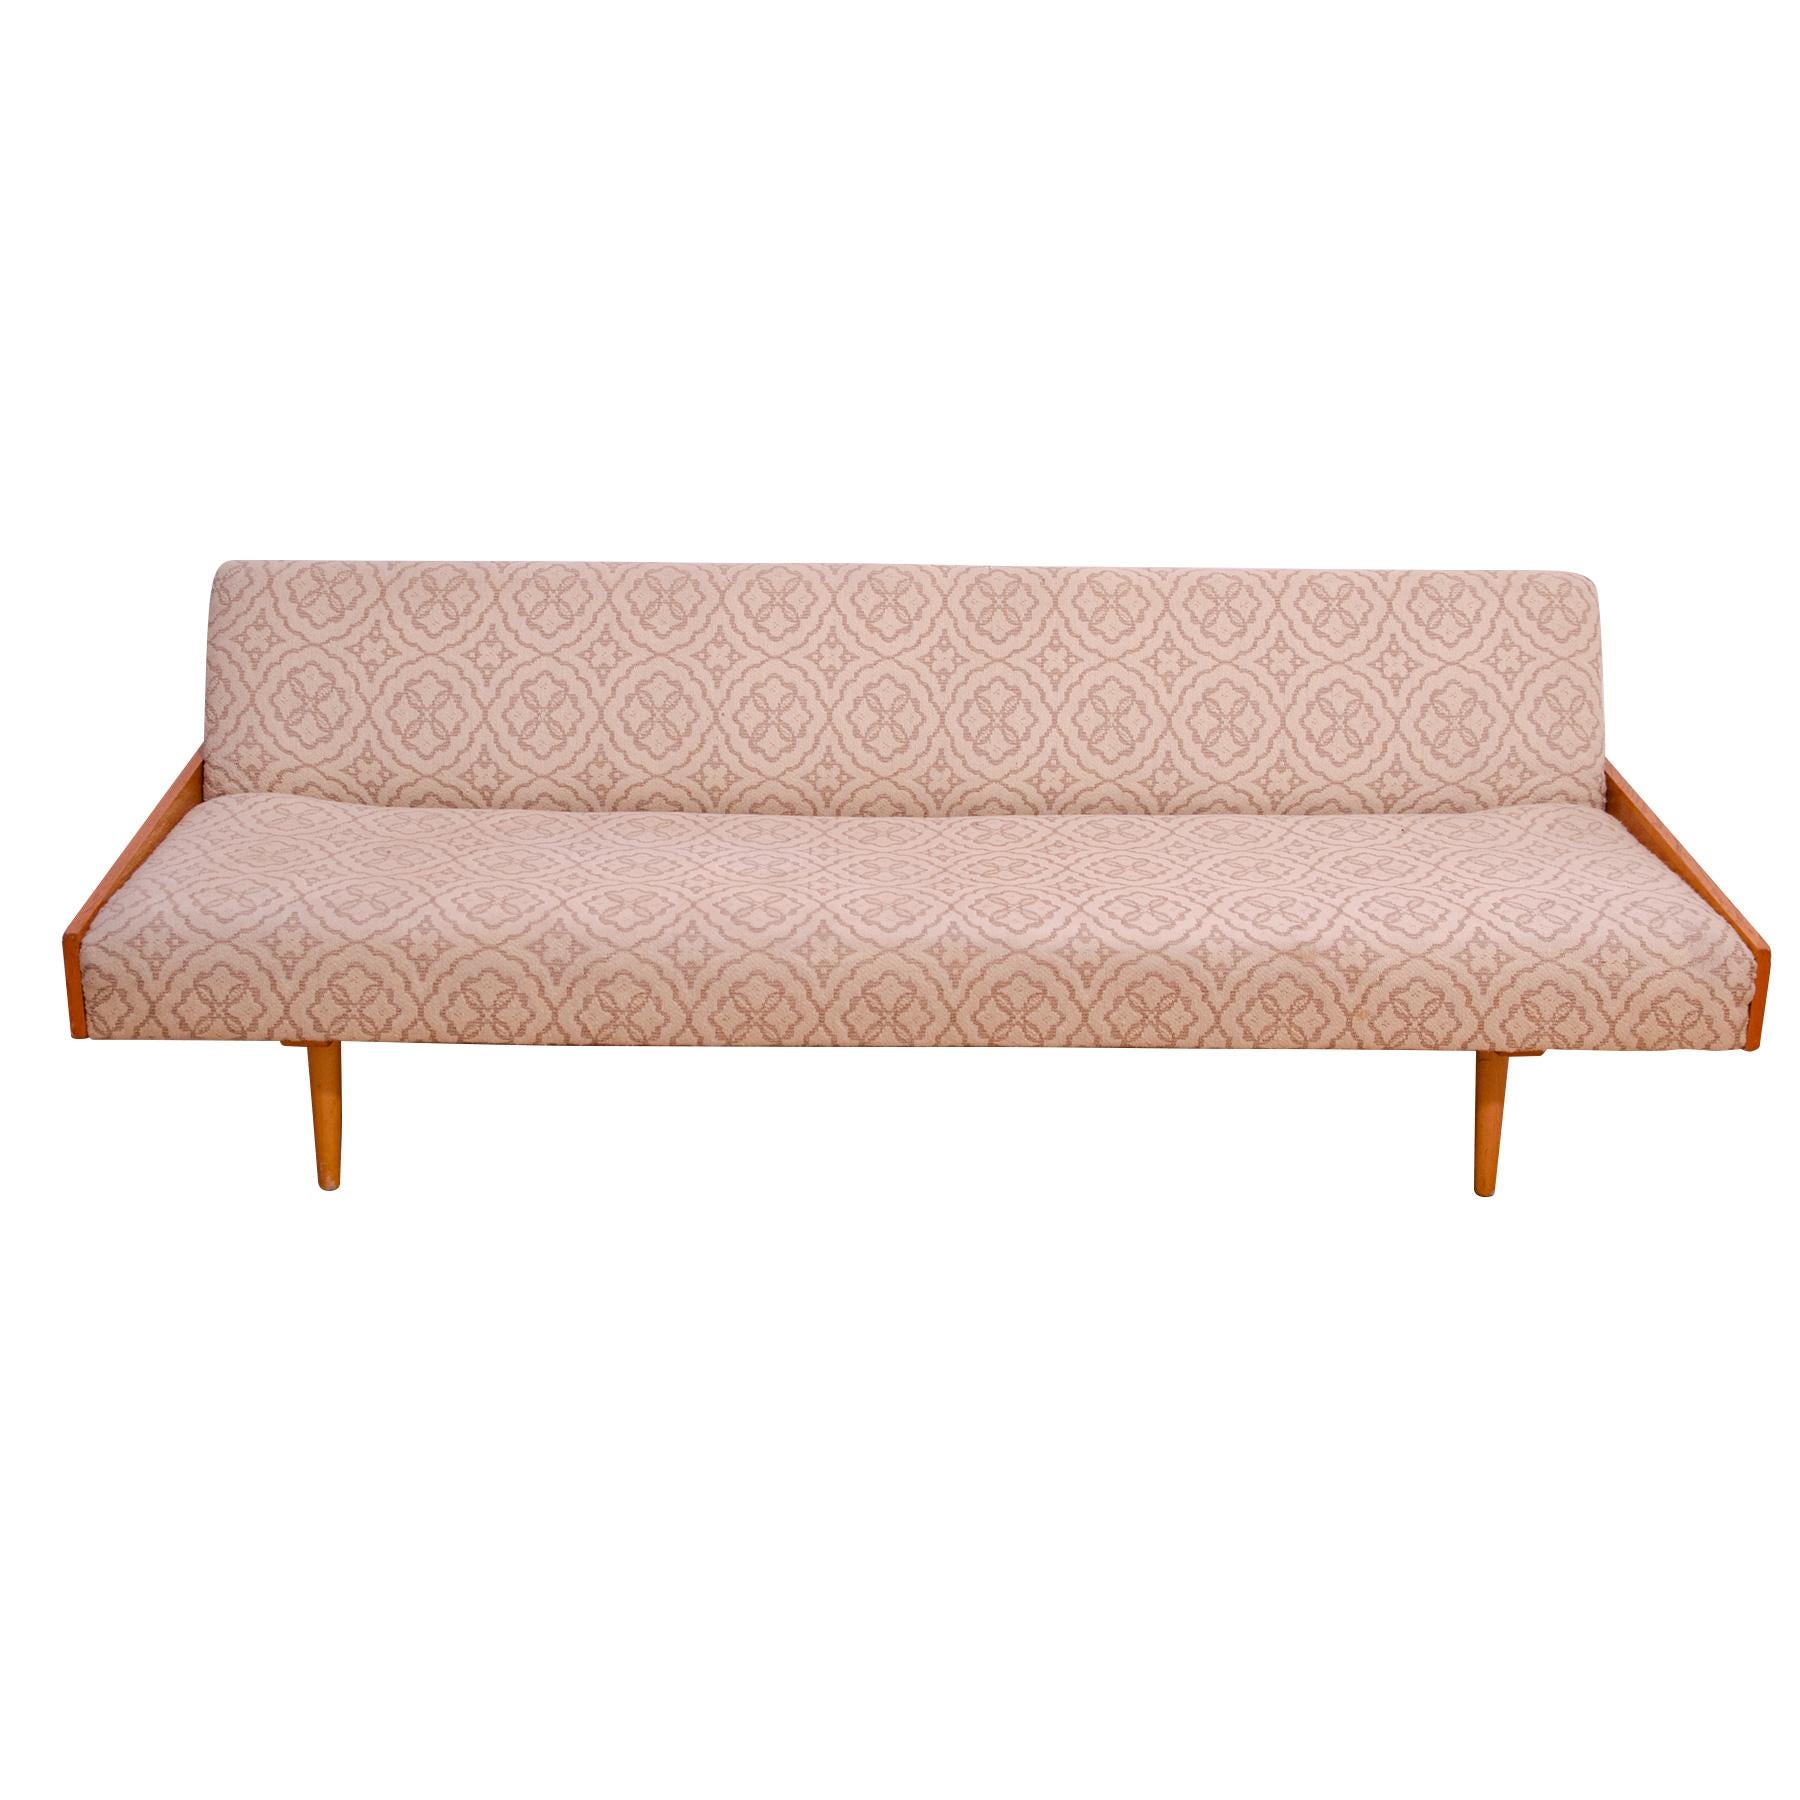 This Scandinavian style sofabed was made in the former Czechoslovakia in the 1970s.  The sofa has a wooden structure with ash wood veneer, overall it´s in very good Vintage condition, shows slight signs of age and using.

Lenght: 200 cm

Height: 70